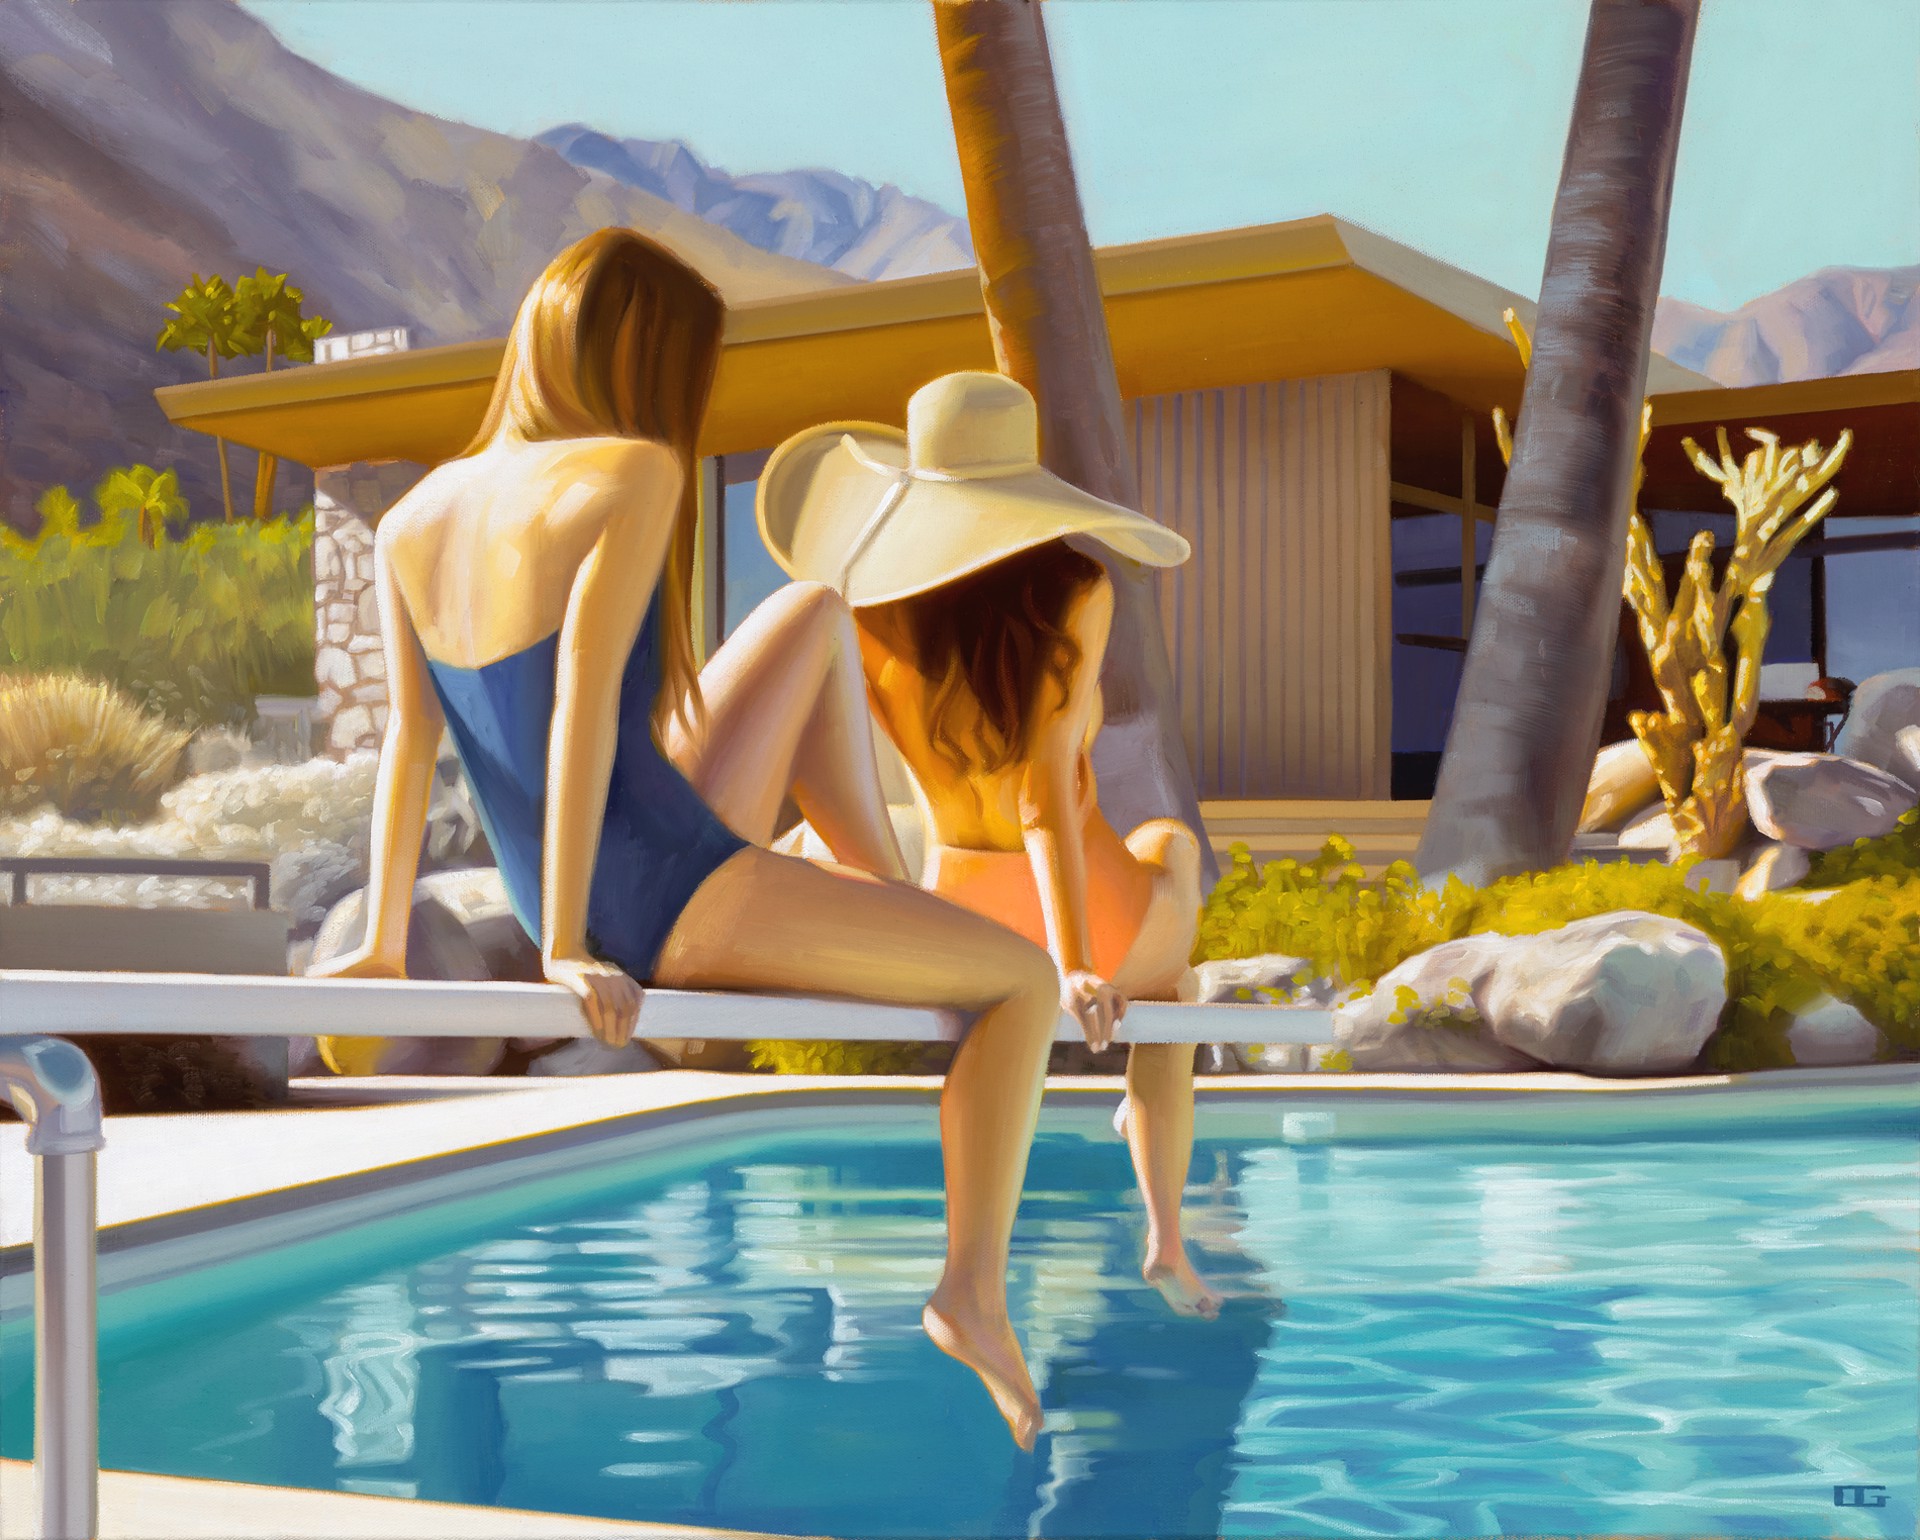 Time for a Dip (S/N) by Carrie Graber